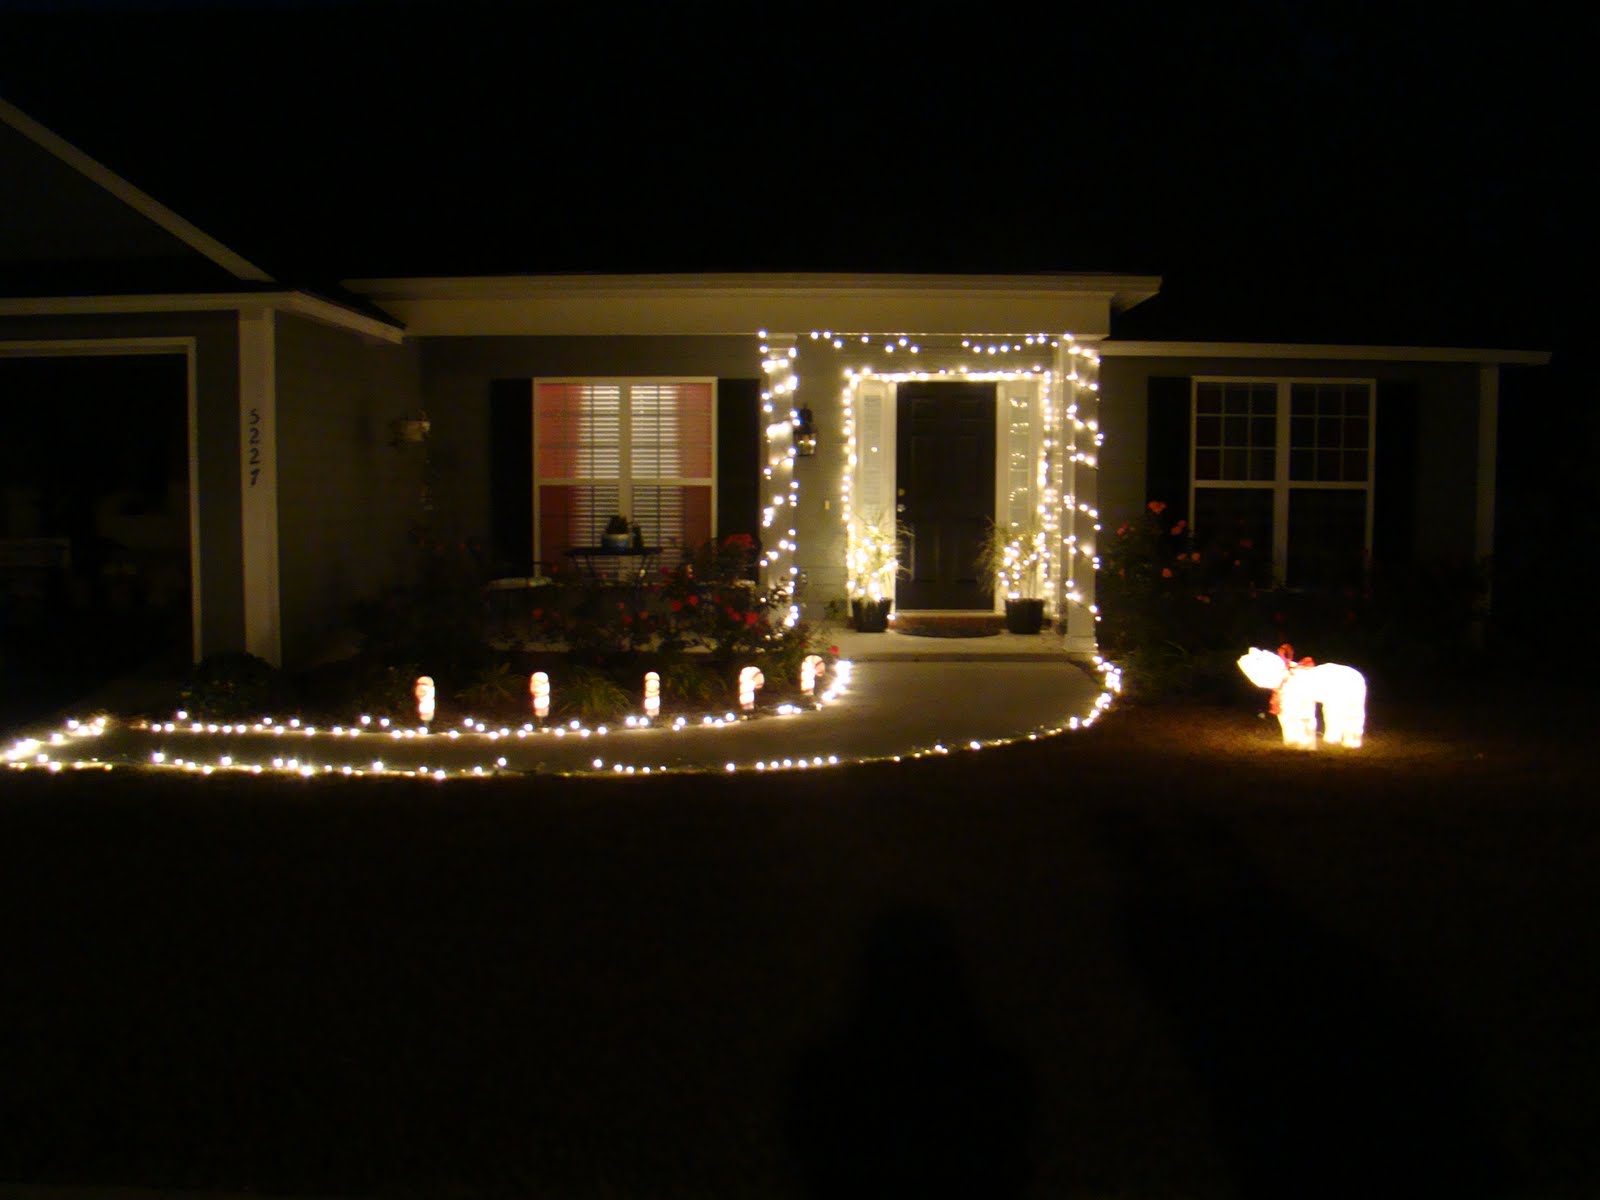 The Parker House: Ready for Christmas!